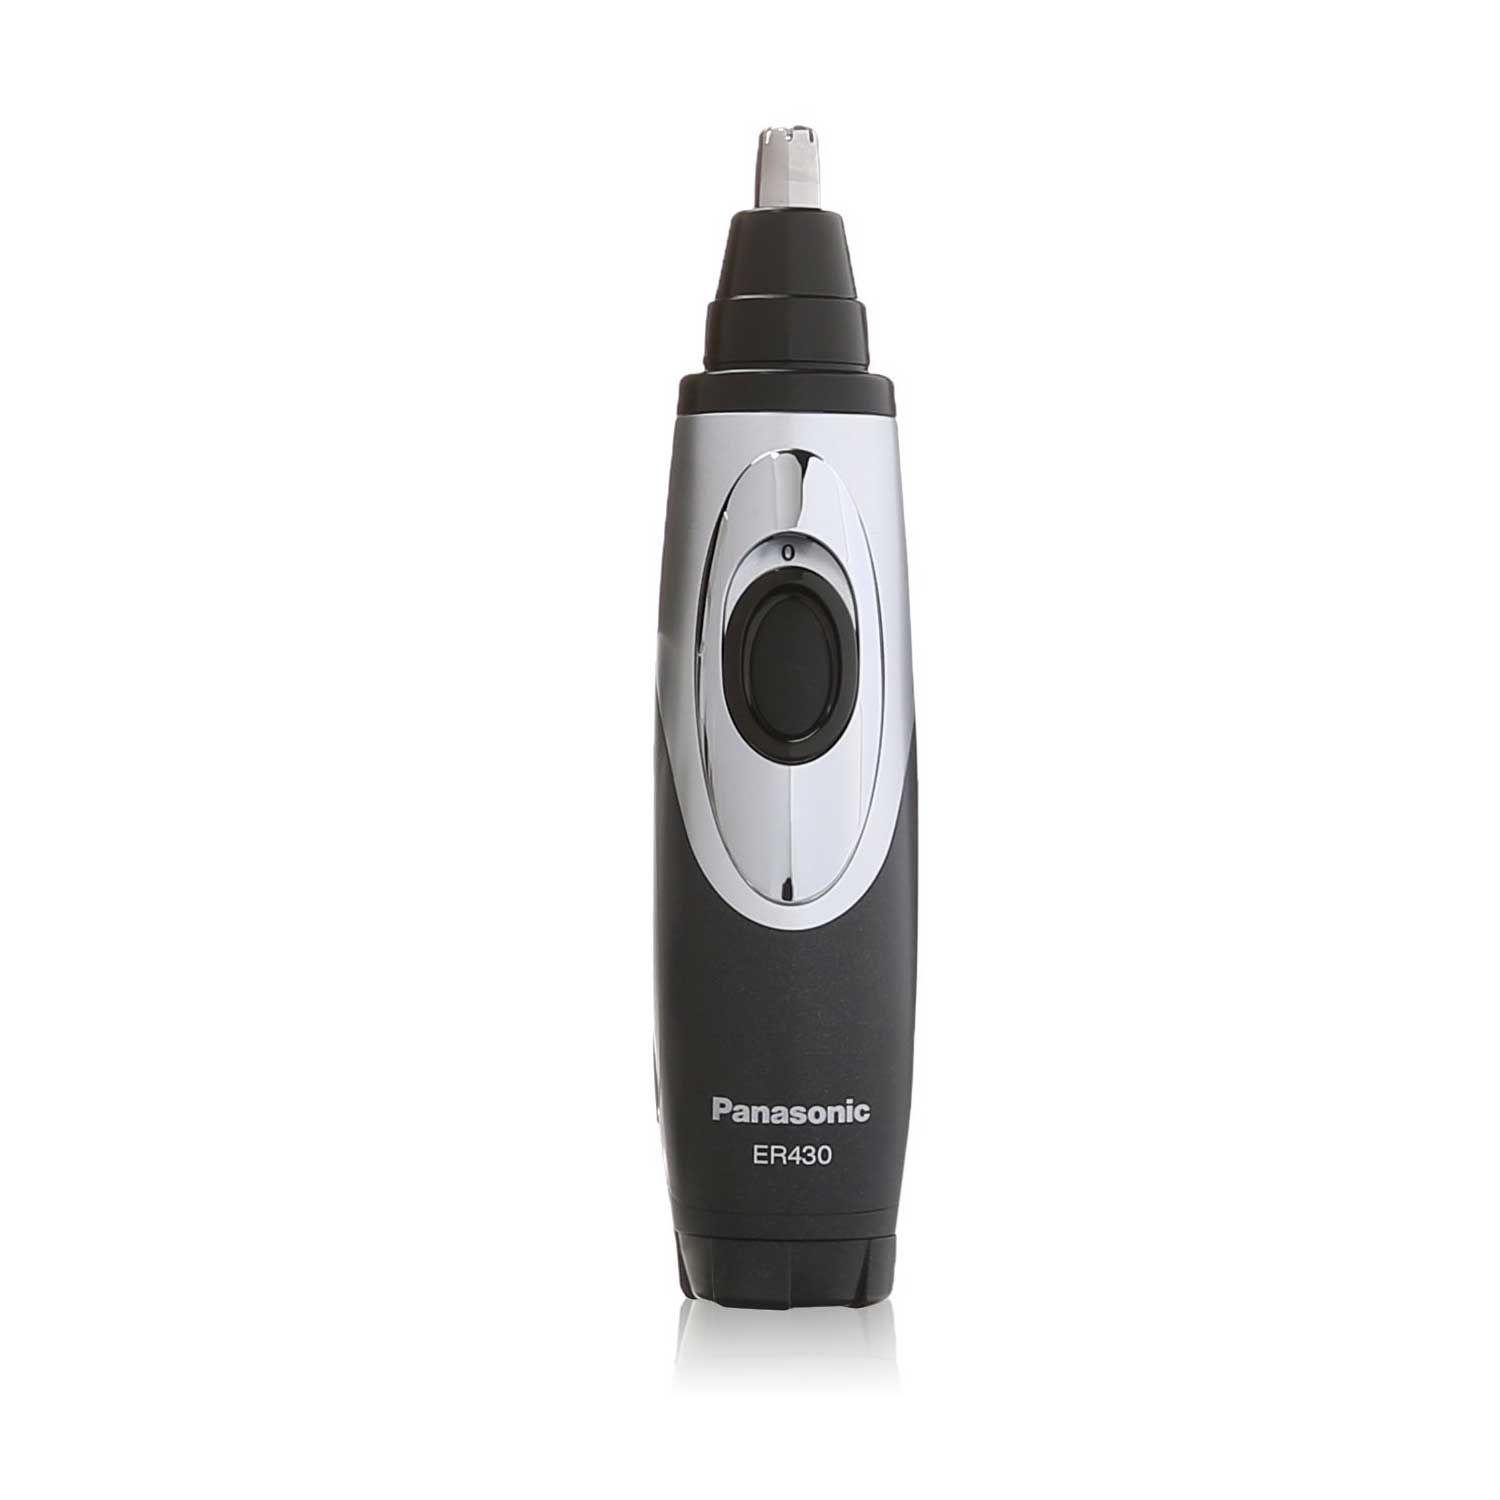 Panasonic Nose Hair Trimmer Review